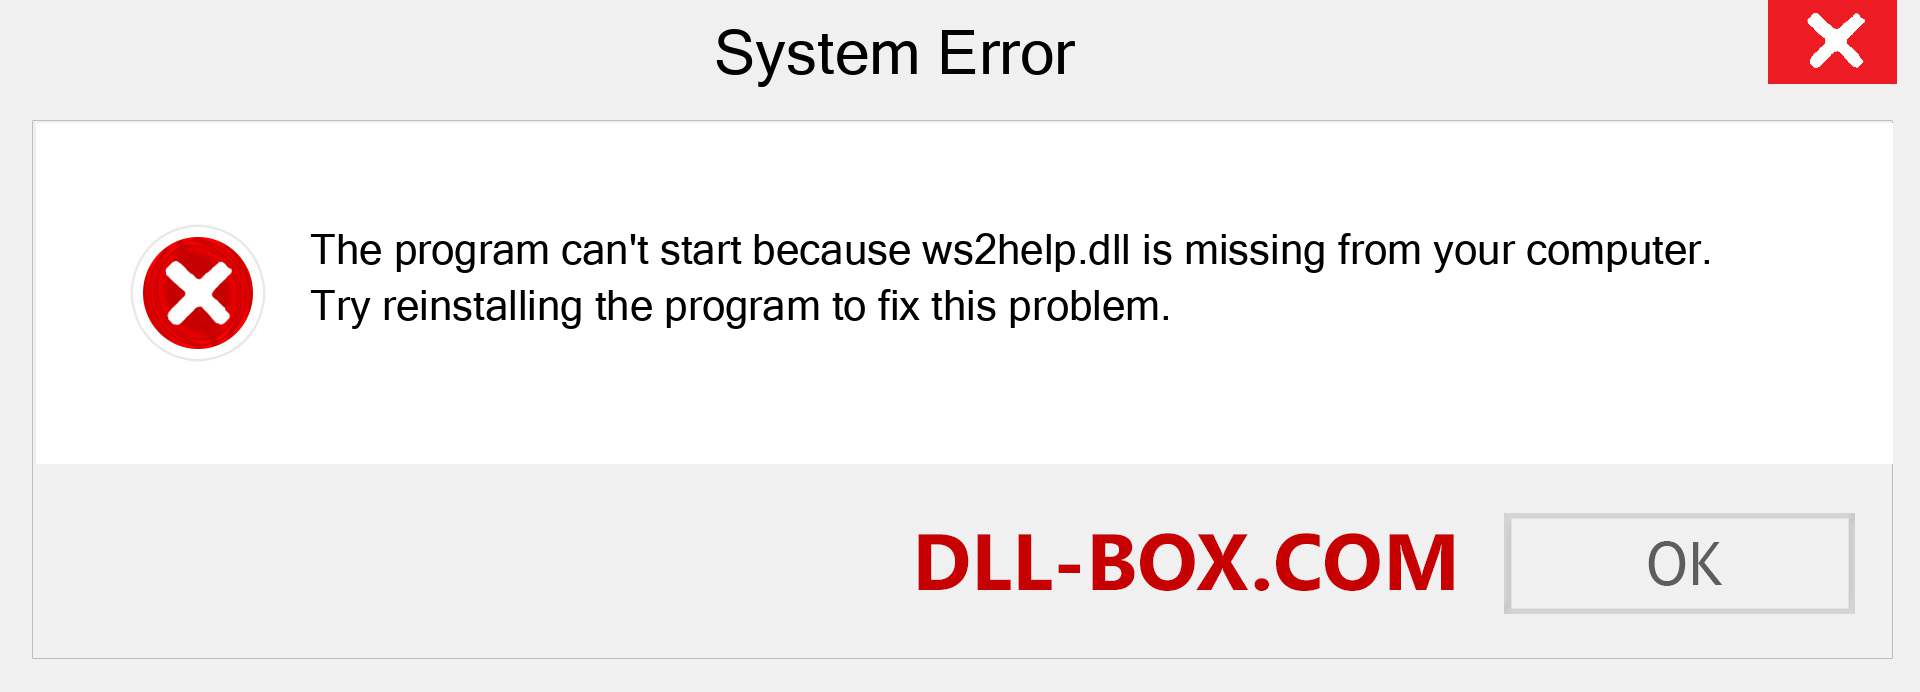  ws2help.dll file is missing?. Download for Windows 7, 8, 10 - Fix  ws2help dll Missing Error on Windows, photos, images